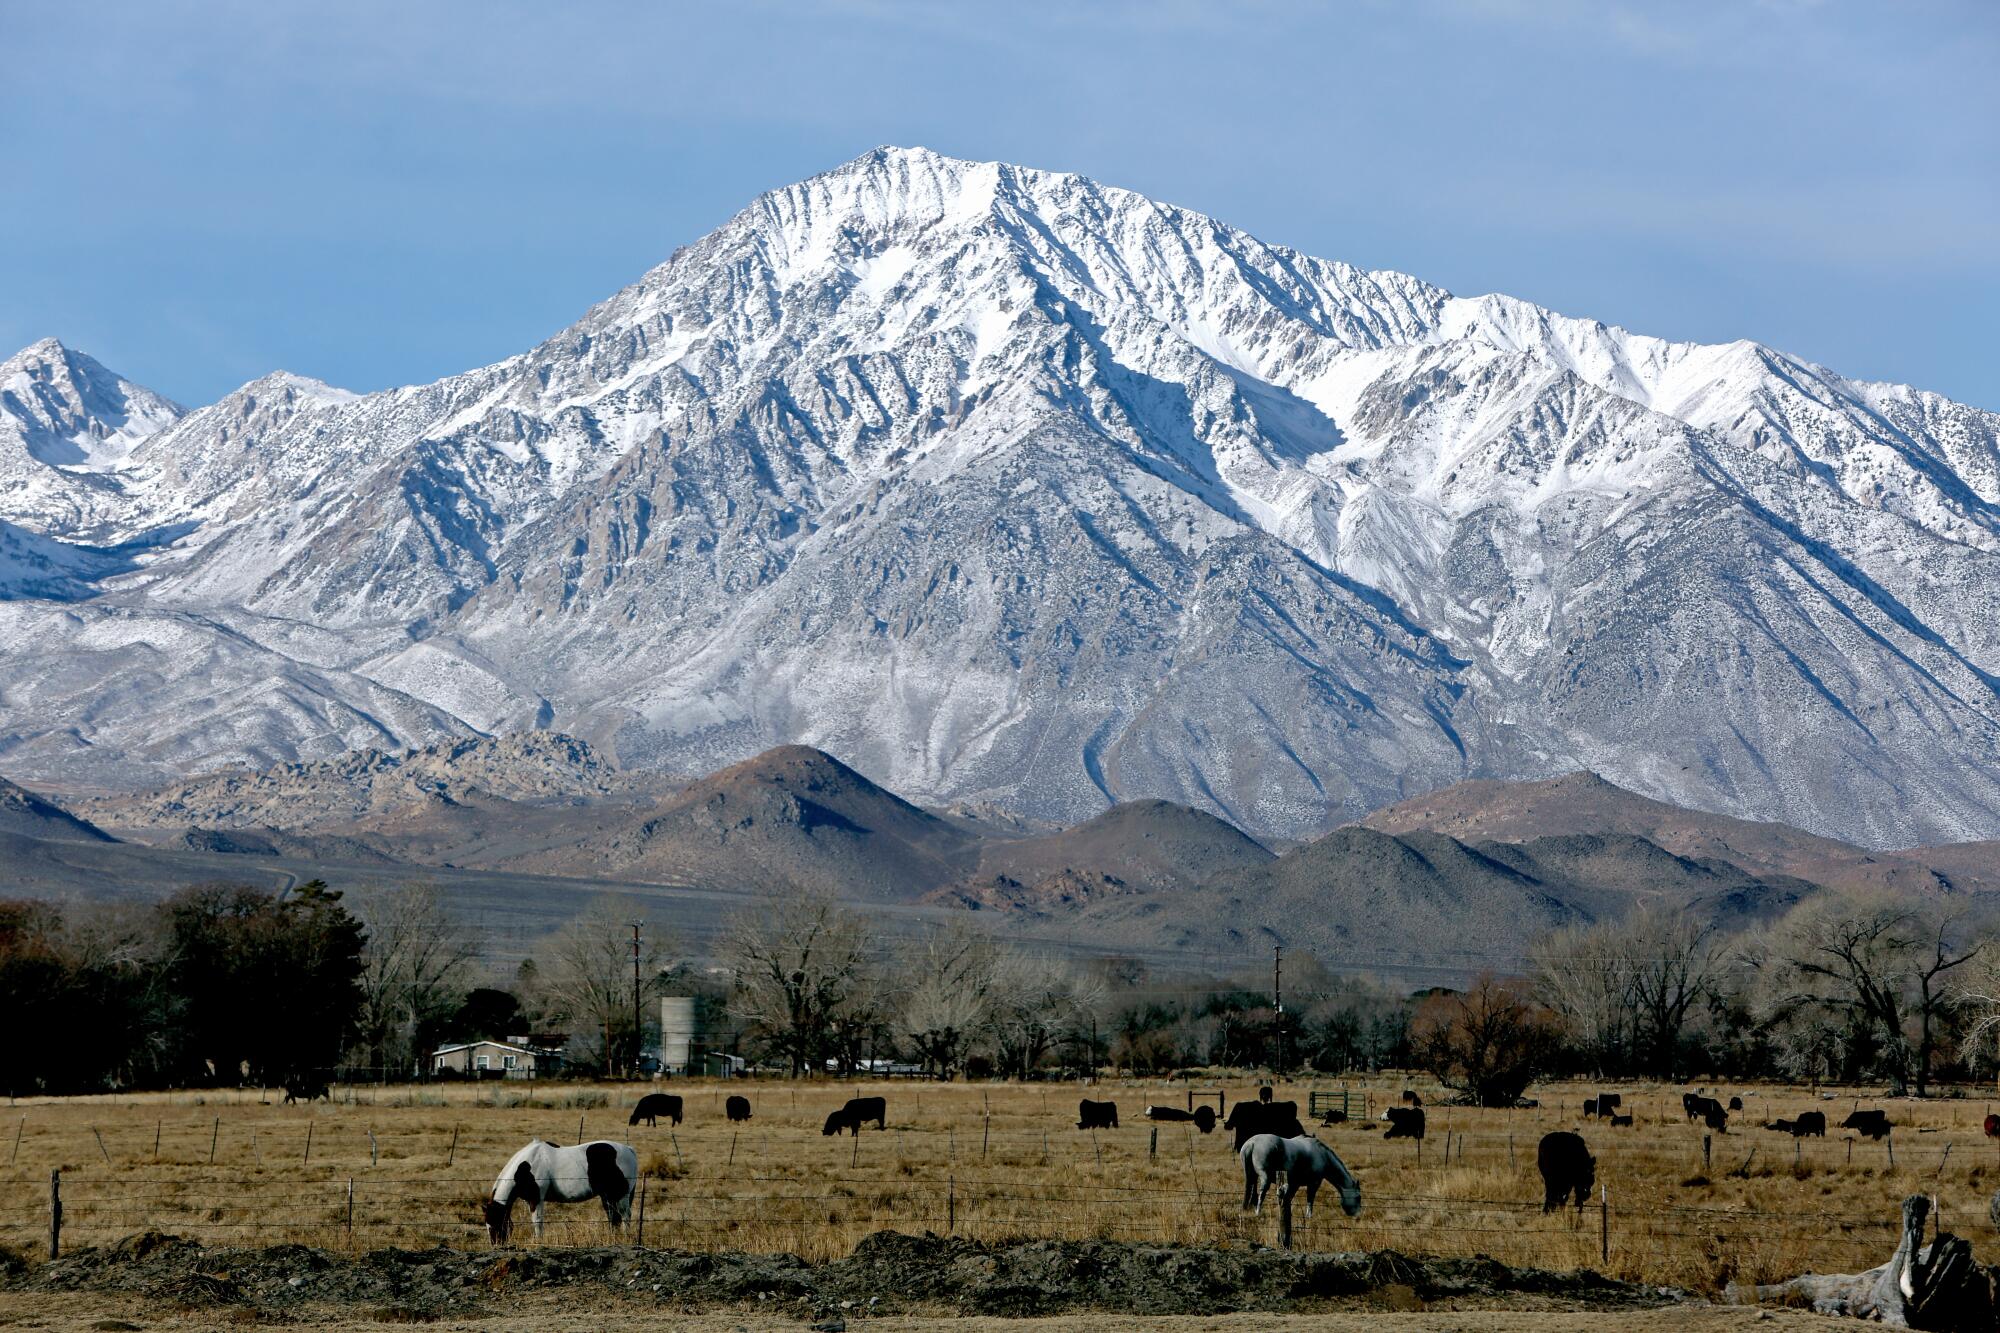 Horses graze in a field beneath snow-capped mountains.